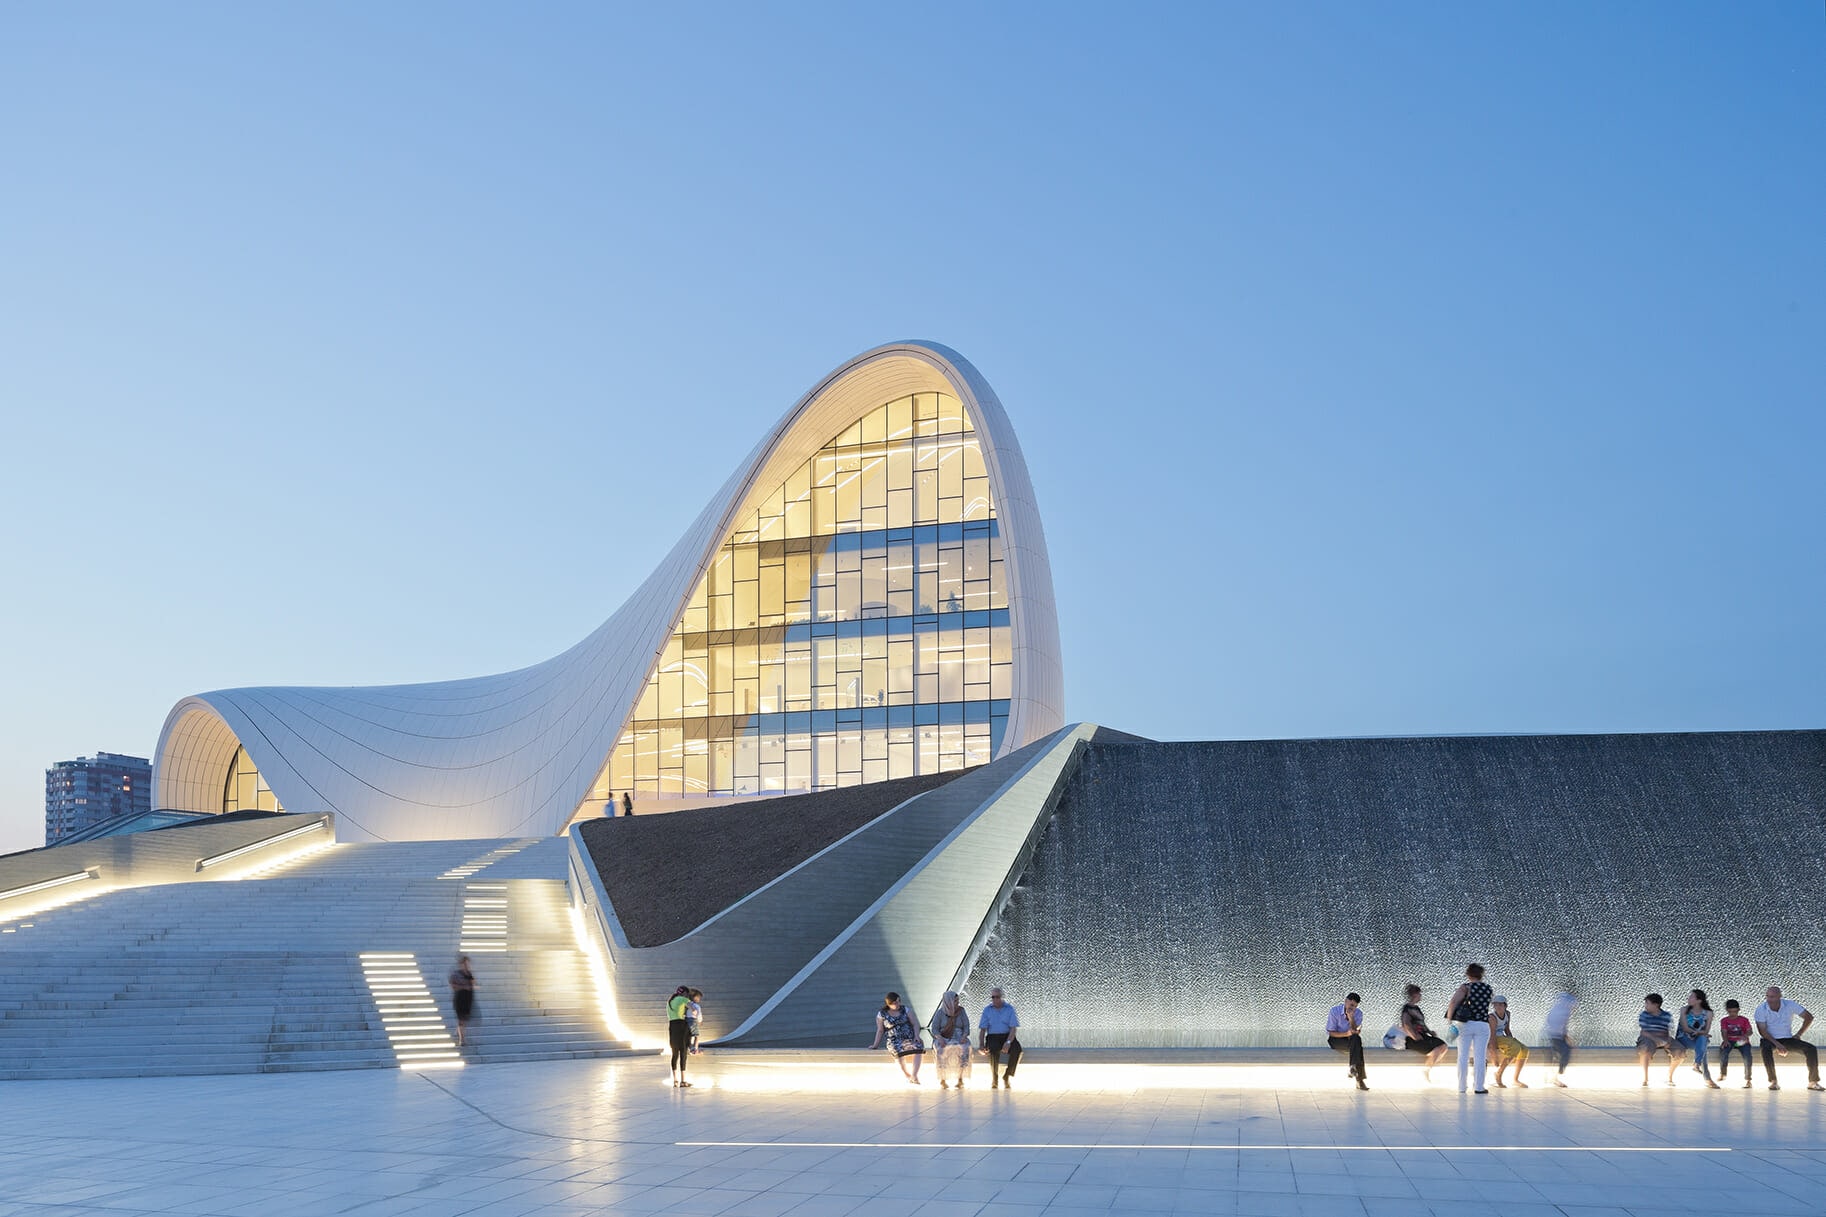 The Best of Zaha Hadid this Side of the Century - WOMAN